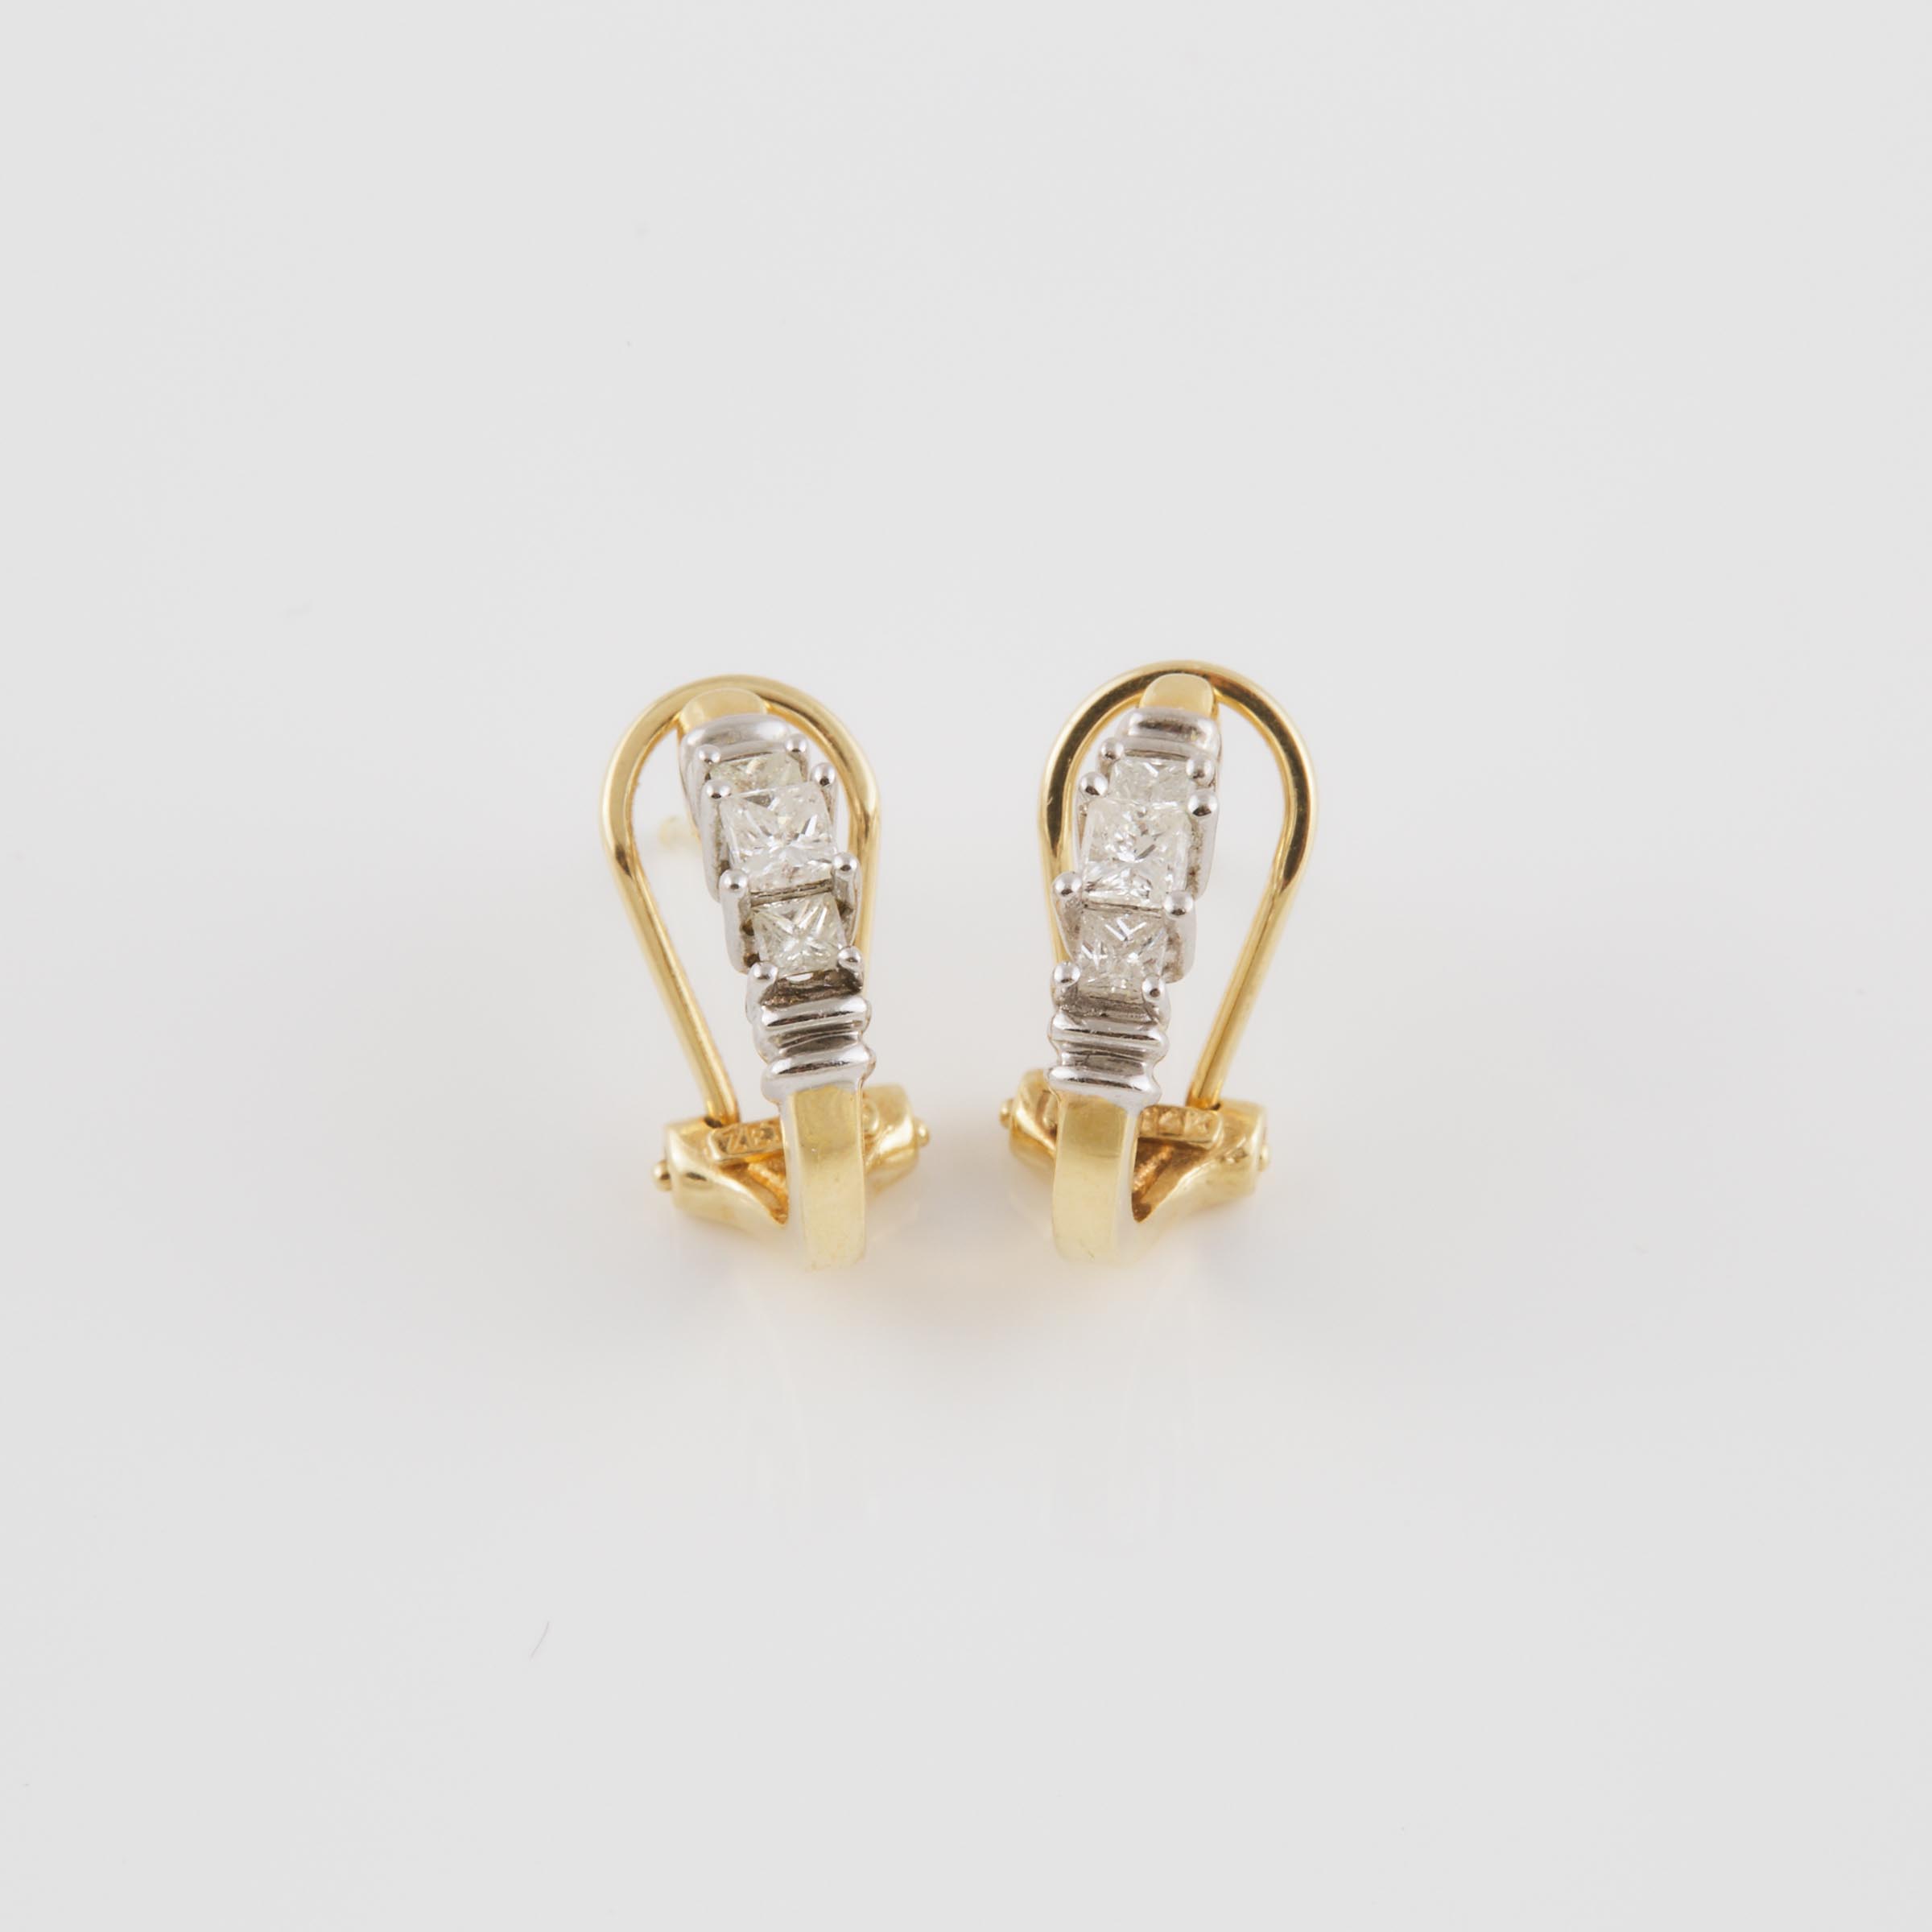 Pair Of 14k Yellow And White Gold Earrings